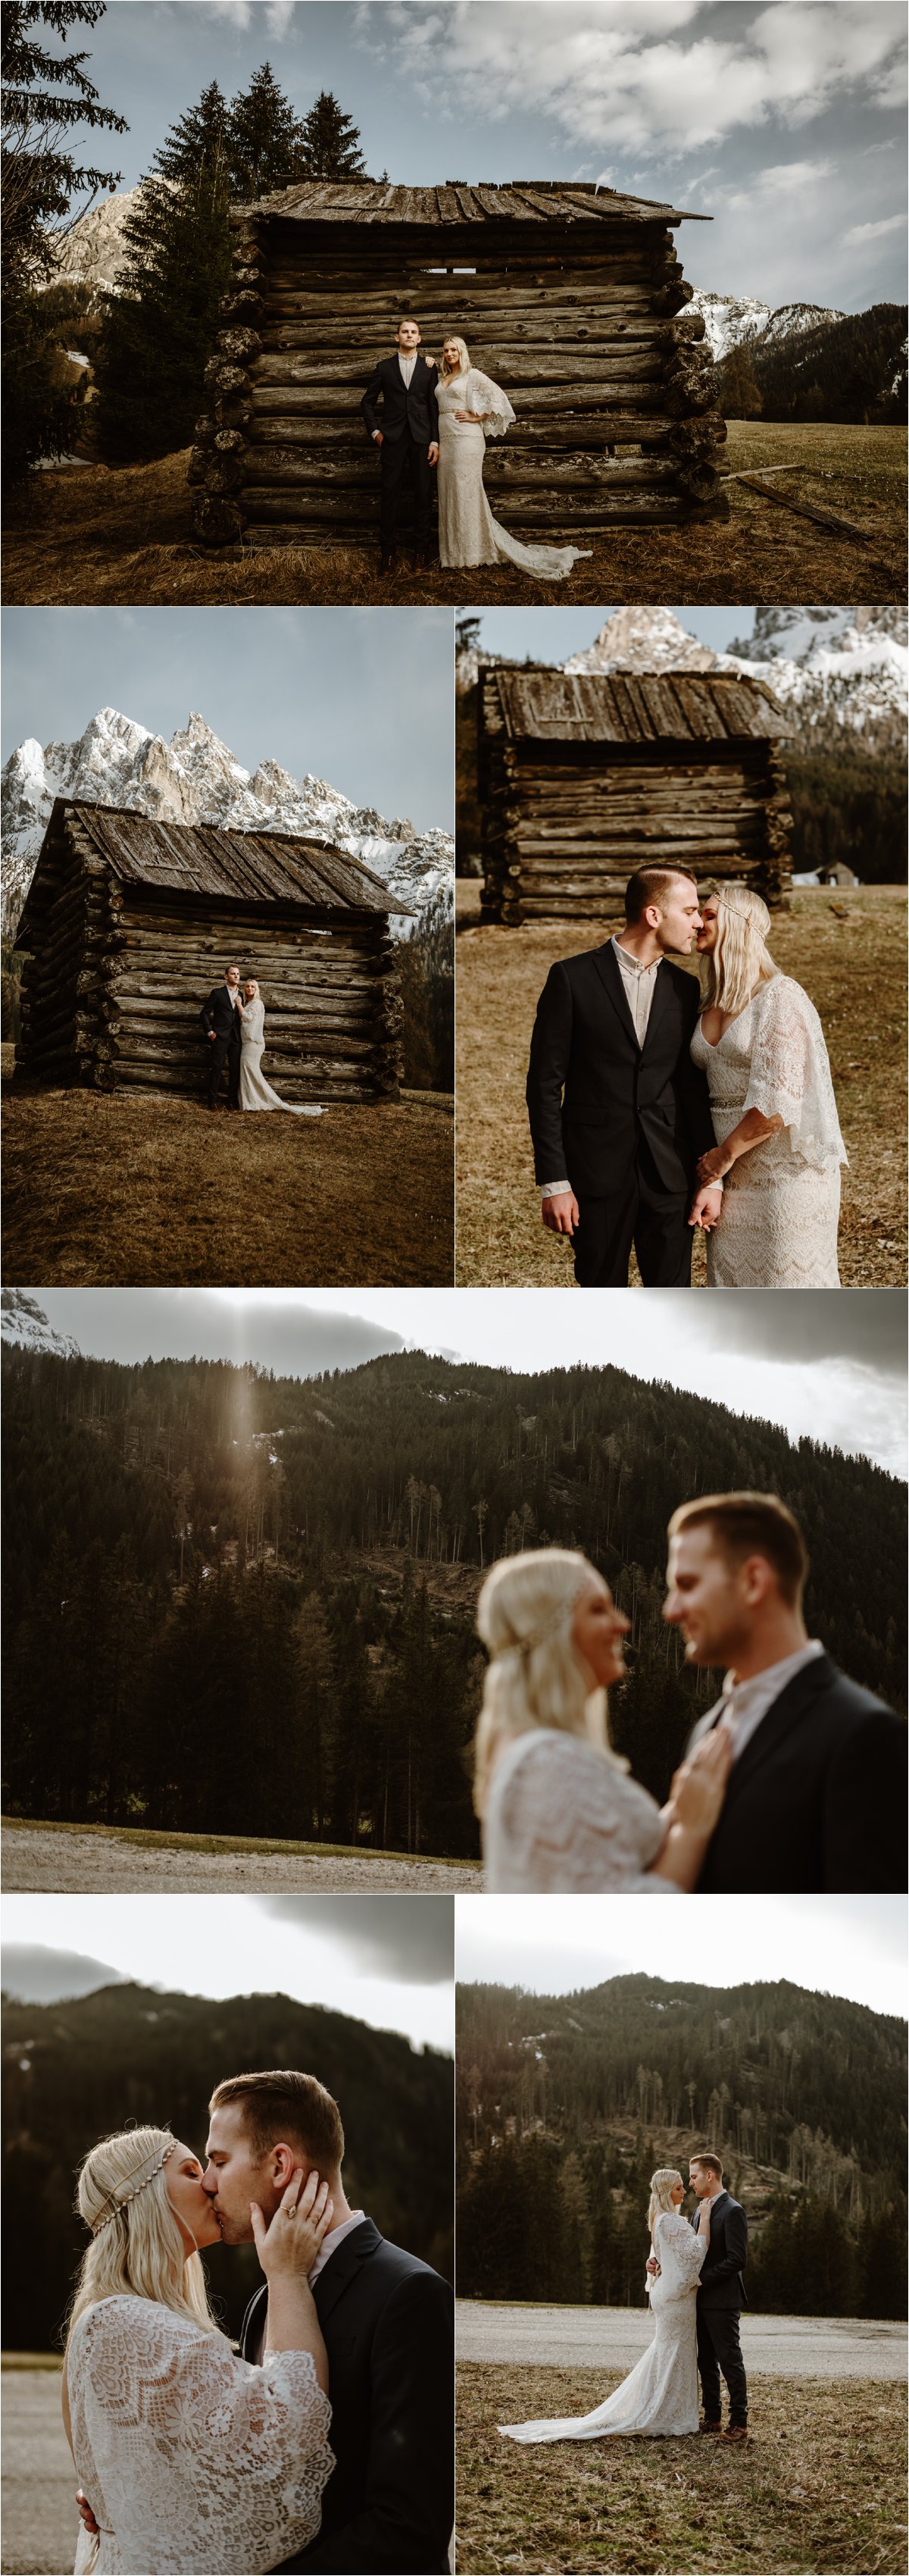 An old wooden farmers hut in the Italian Alps. Erika & Nathan spend their elopement day exploring in the Dolomites. Photos by Wild Connections Photography - Alps & Dolomites Elopement Photographer